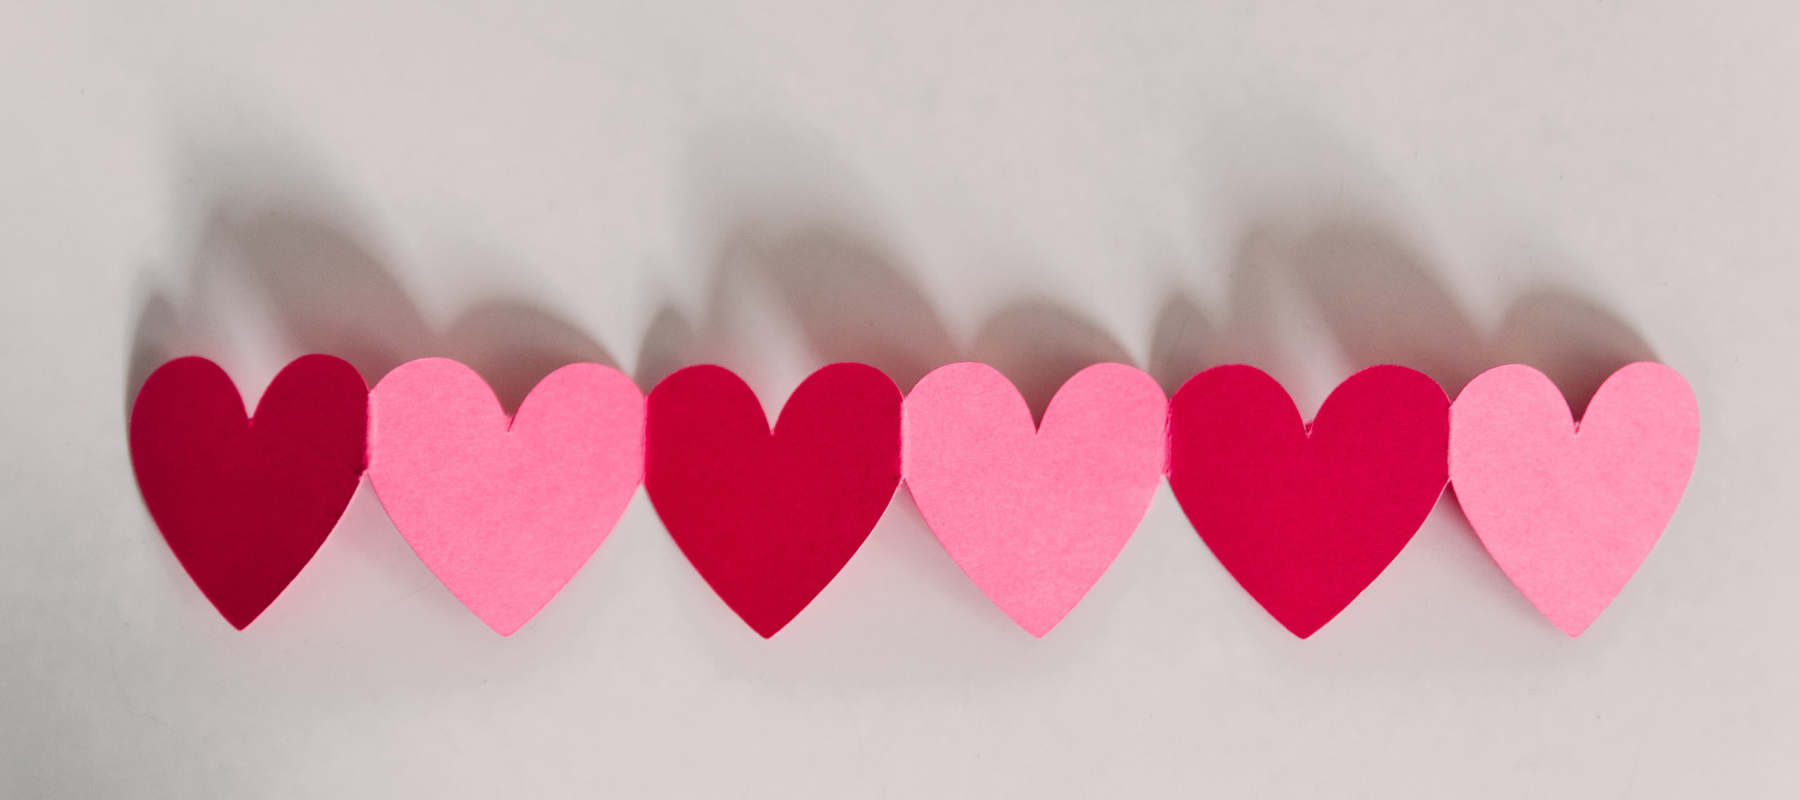 Hearts in a row for Valentine's Day